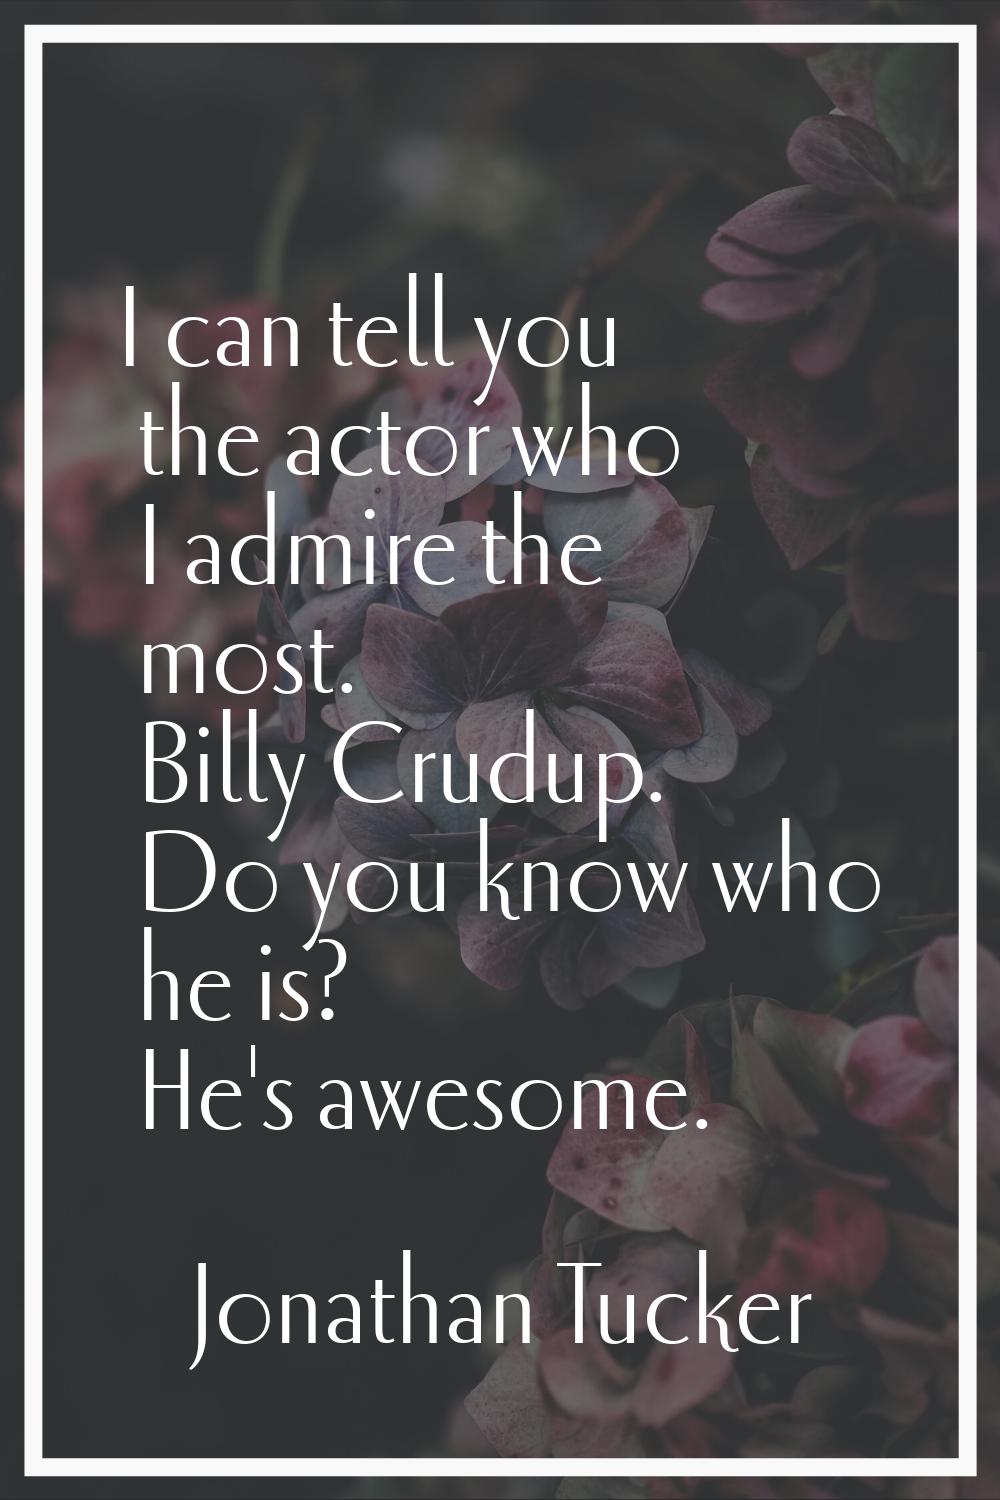 I can tell you the actor who I admire the most. Billy Crudup. Do you know who he is? He's awesome.